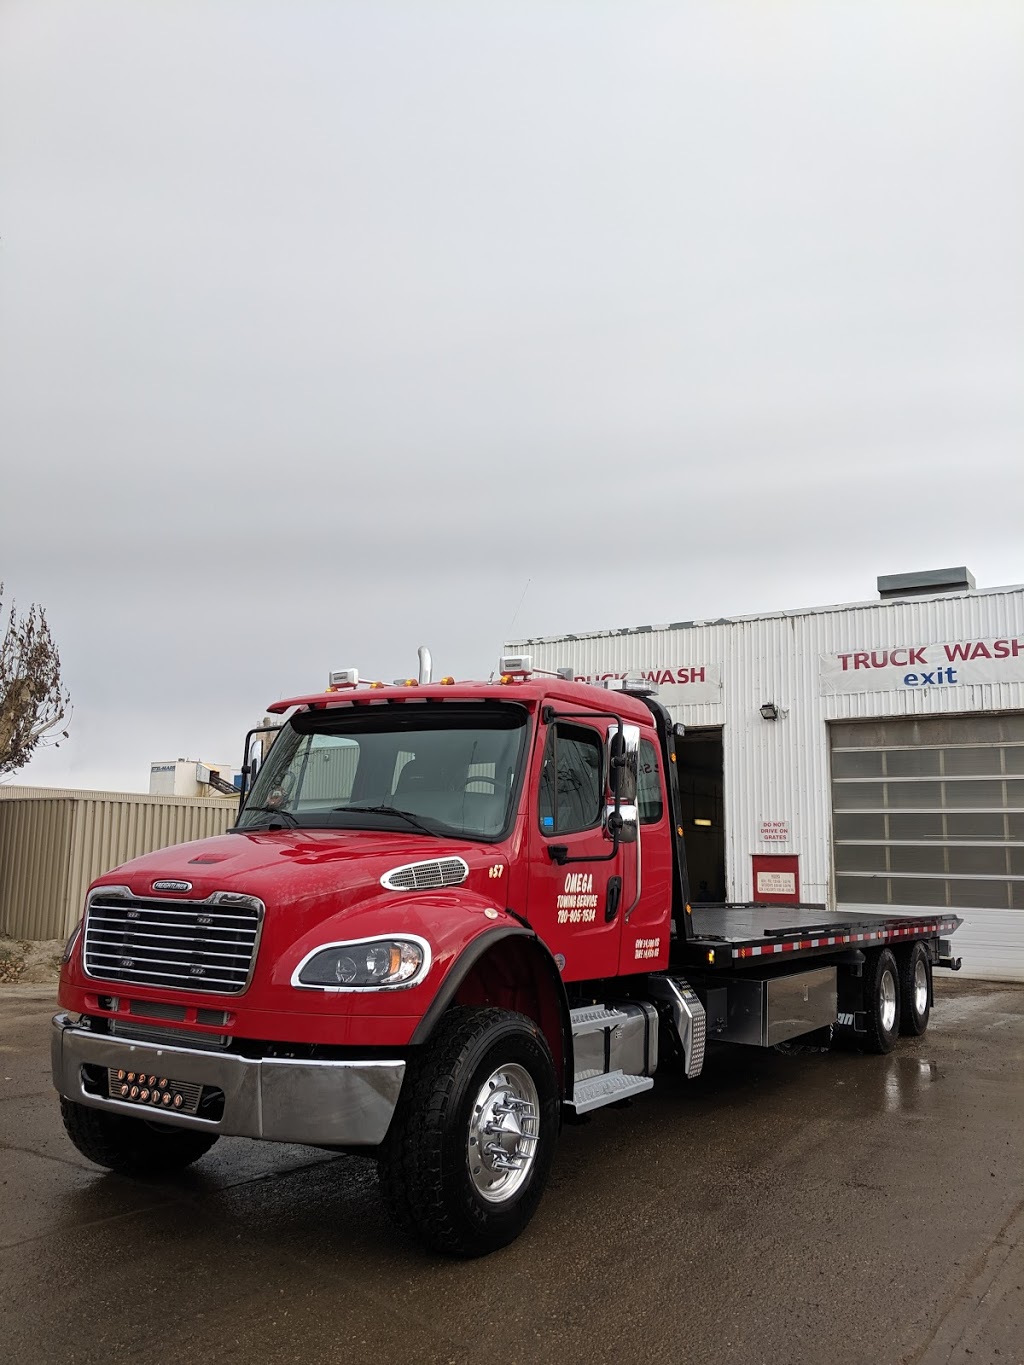 City Truck Stop Truck Wash | 11959 167 St NW, Edmonton, AB T5V 1P1, Canada | Phone: (780) 455-4193